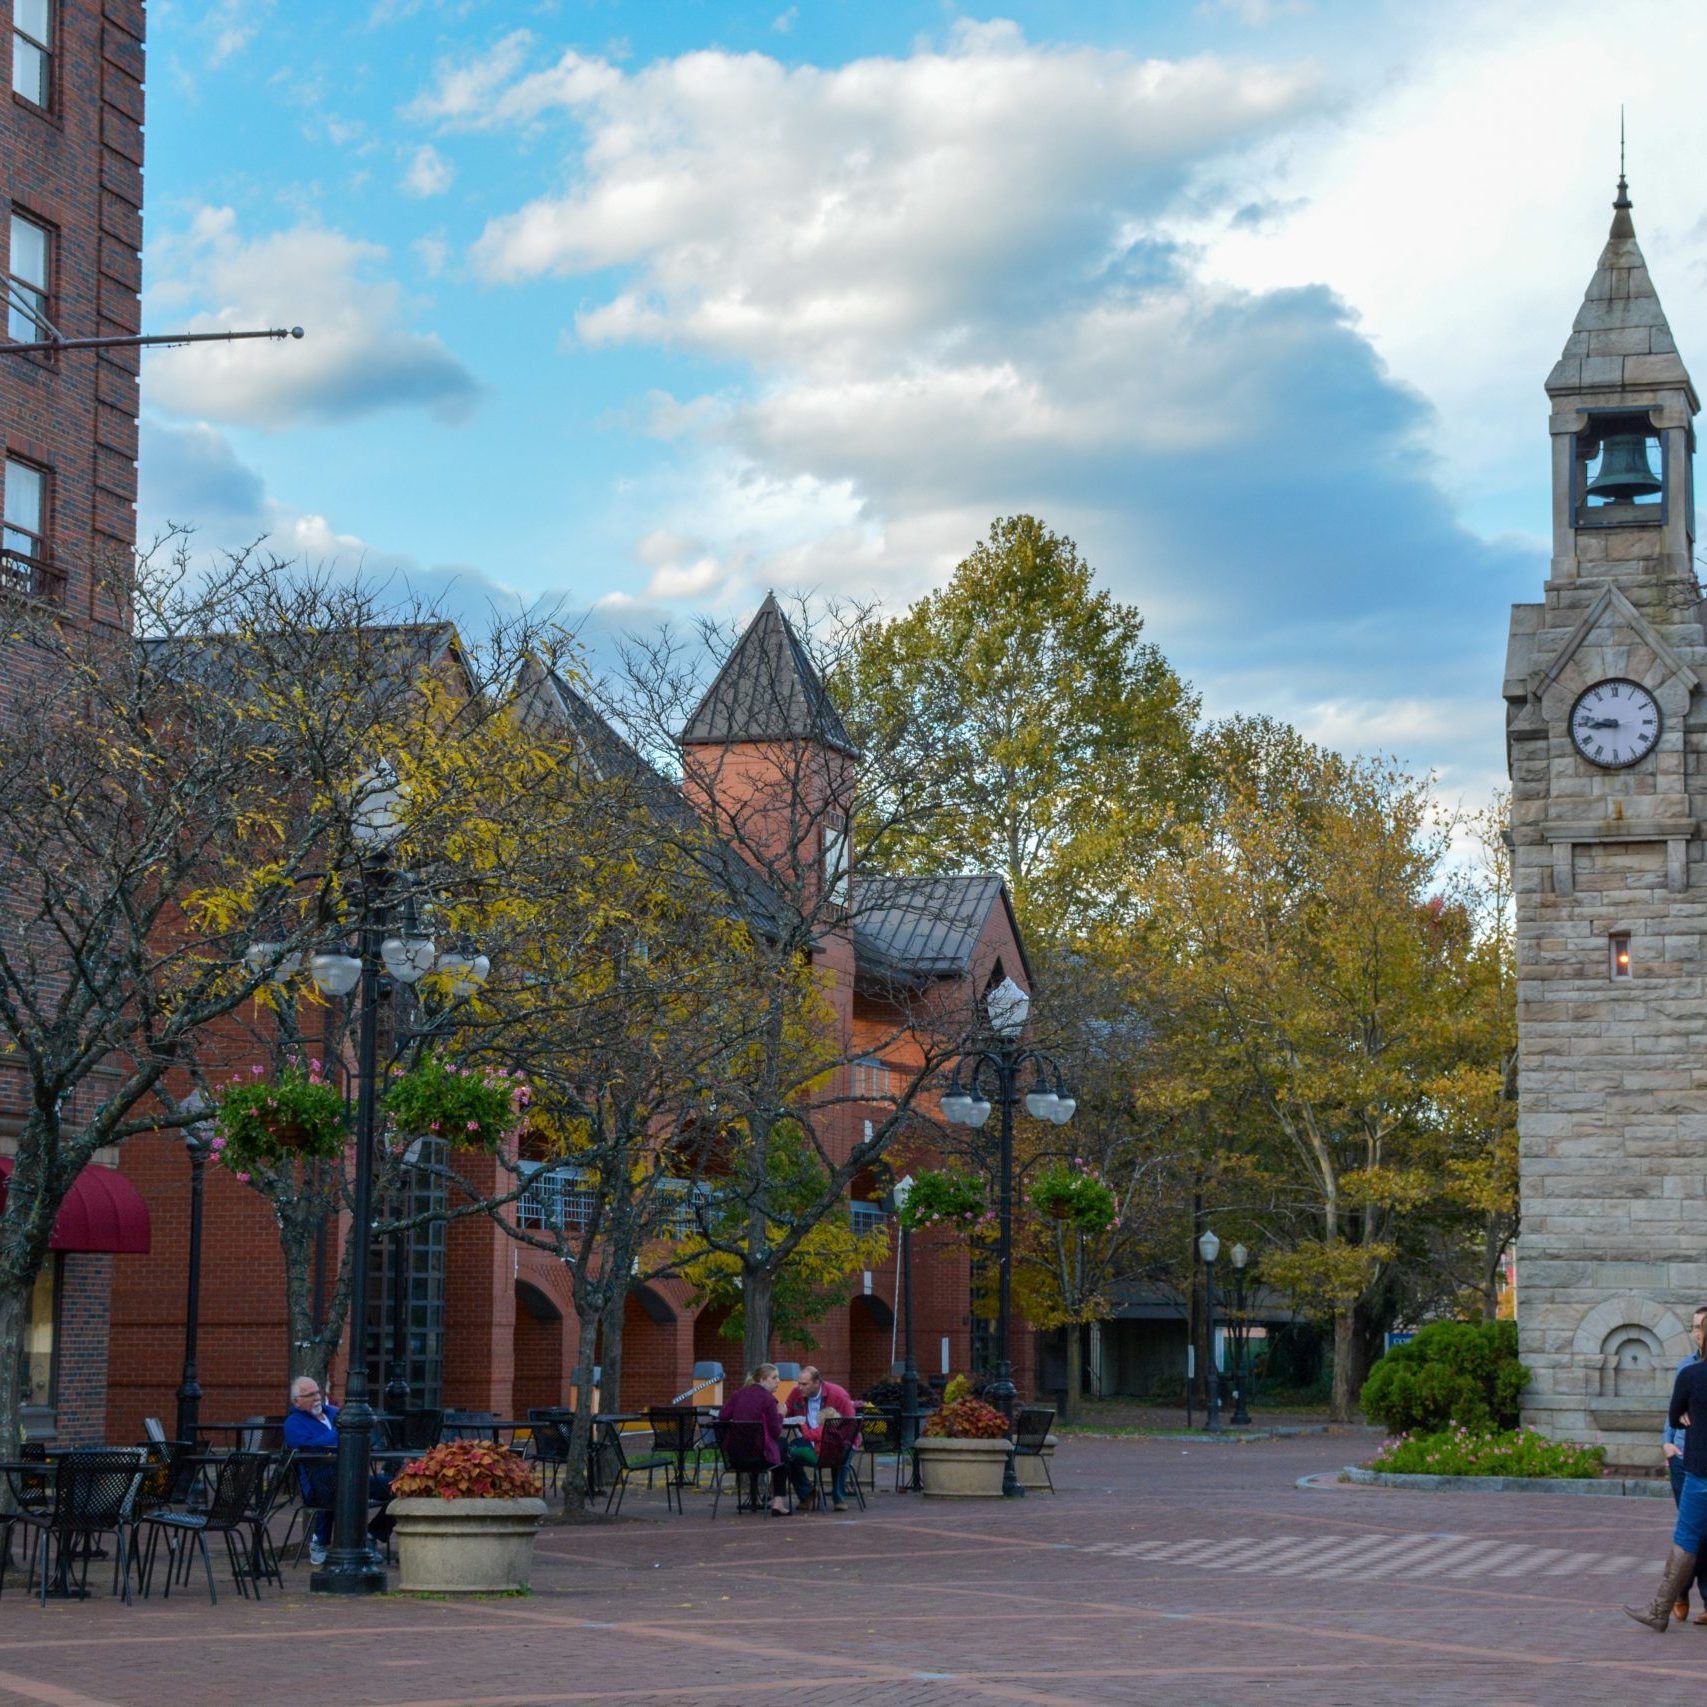 Corning, New York, 2019: Built of Antrim stone found locally, the clock tower in Centerway Square is a memorial to Erastus Corning, for whom the City of Corning is named.